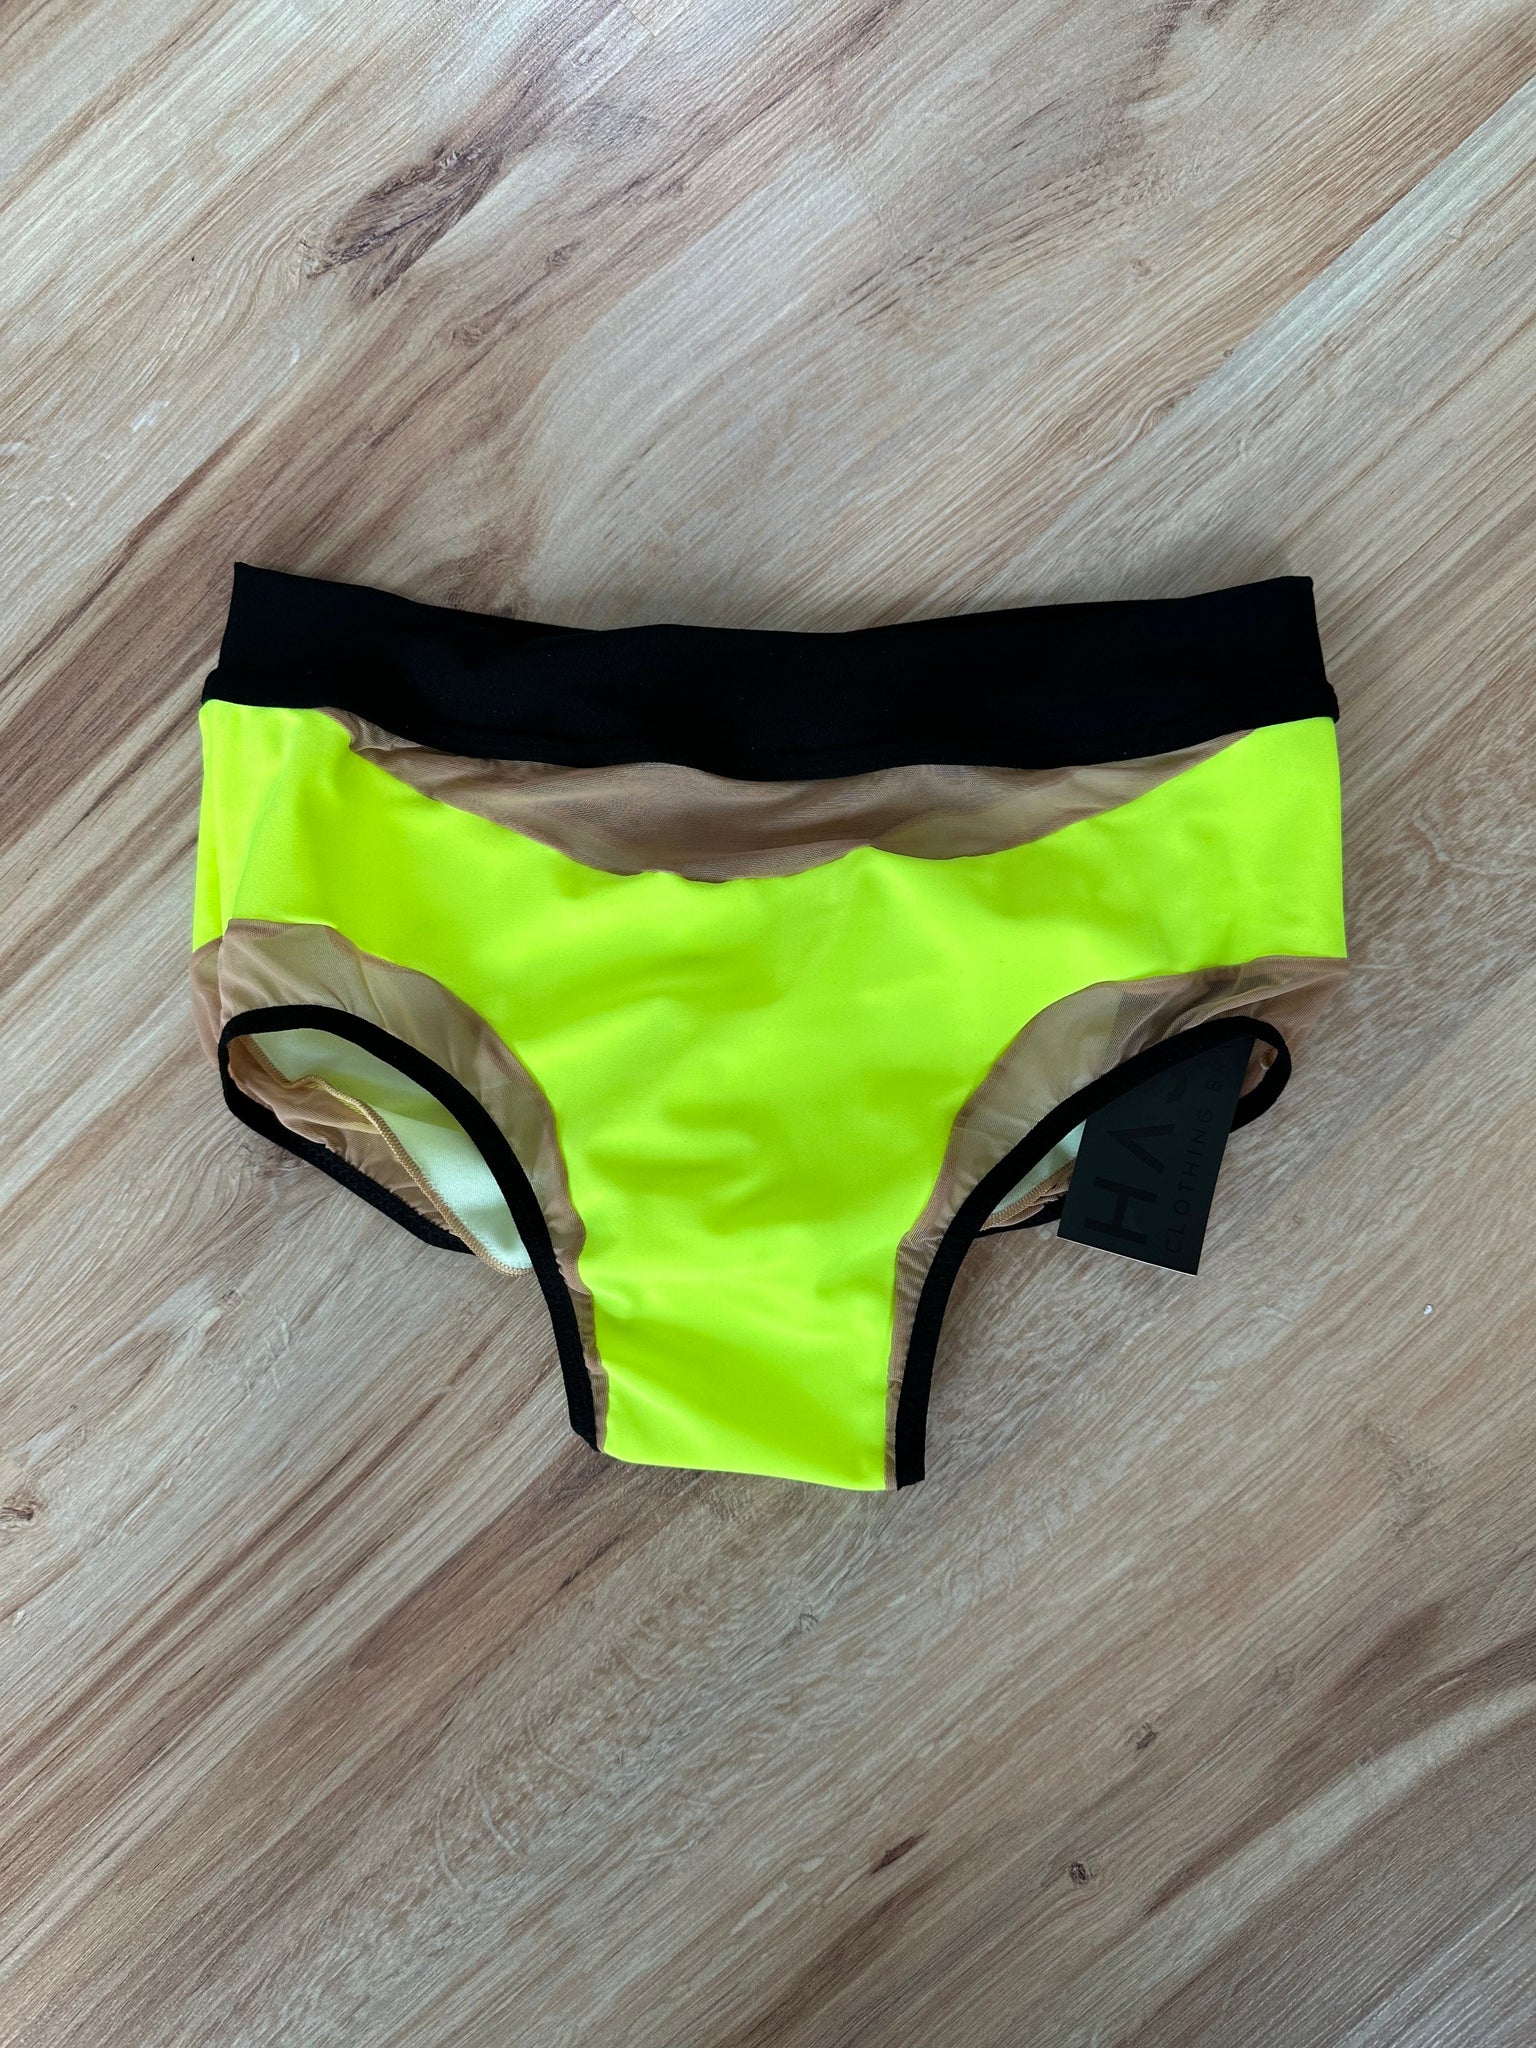 DREAM NEON YELLOW NUDE MESH AND BLACK FINISH OUTLET -25%